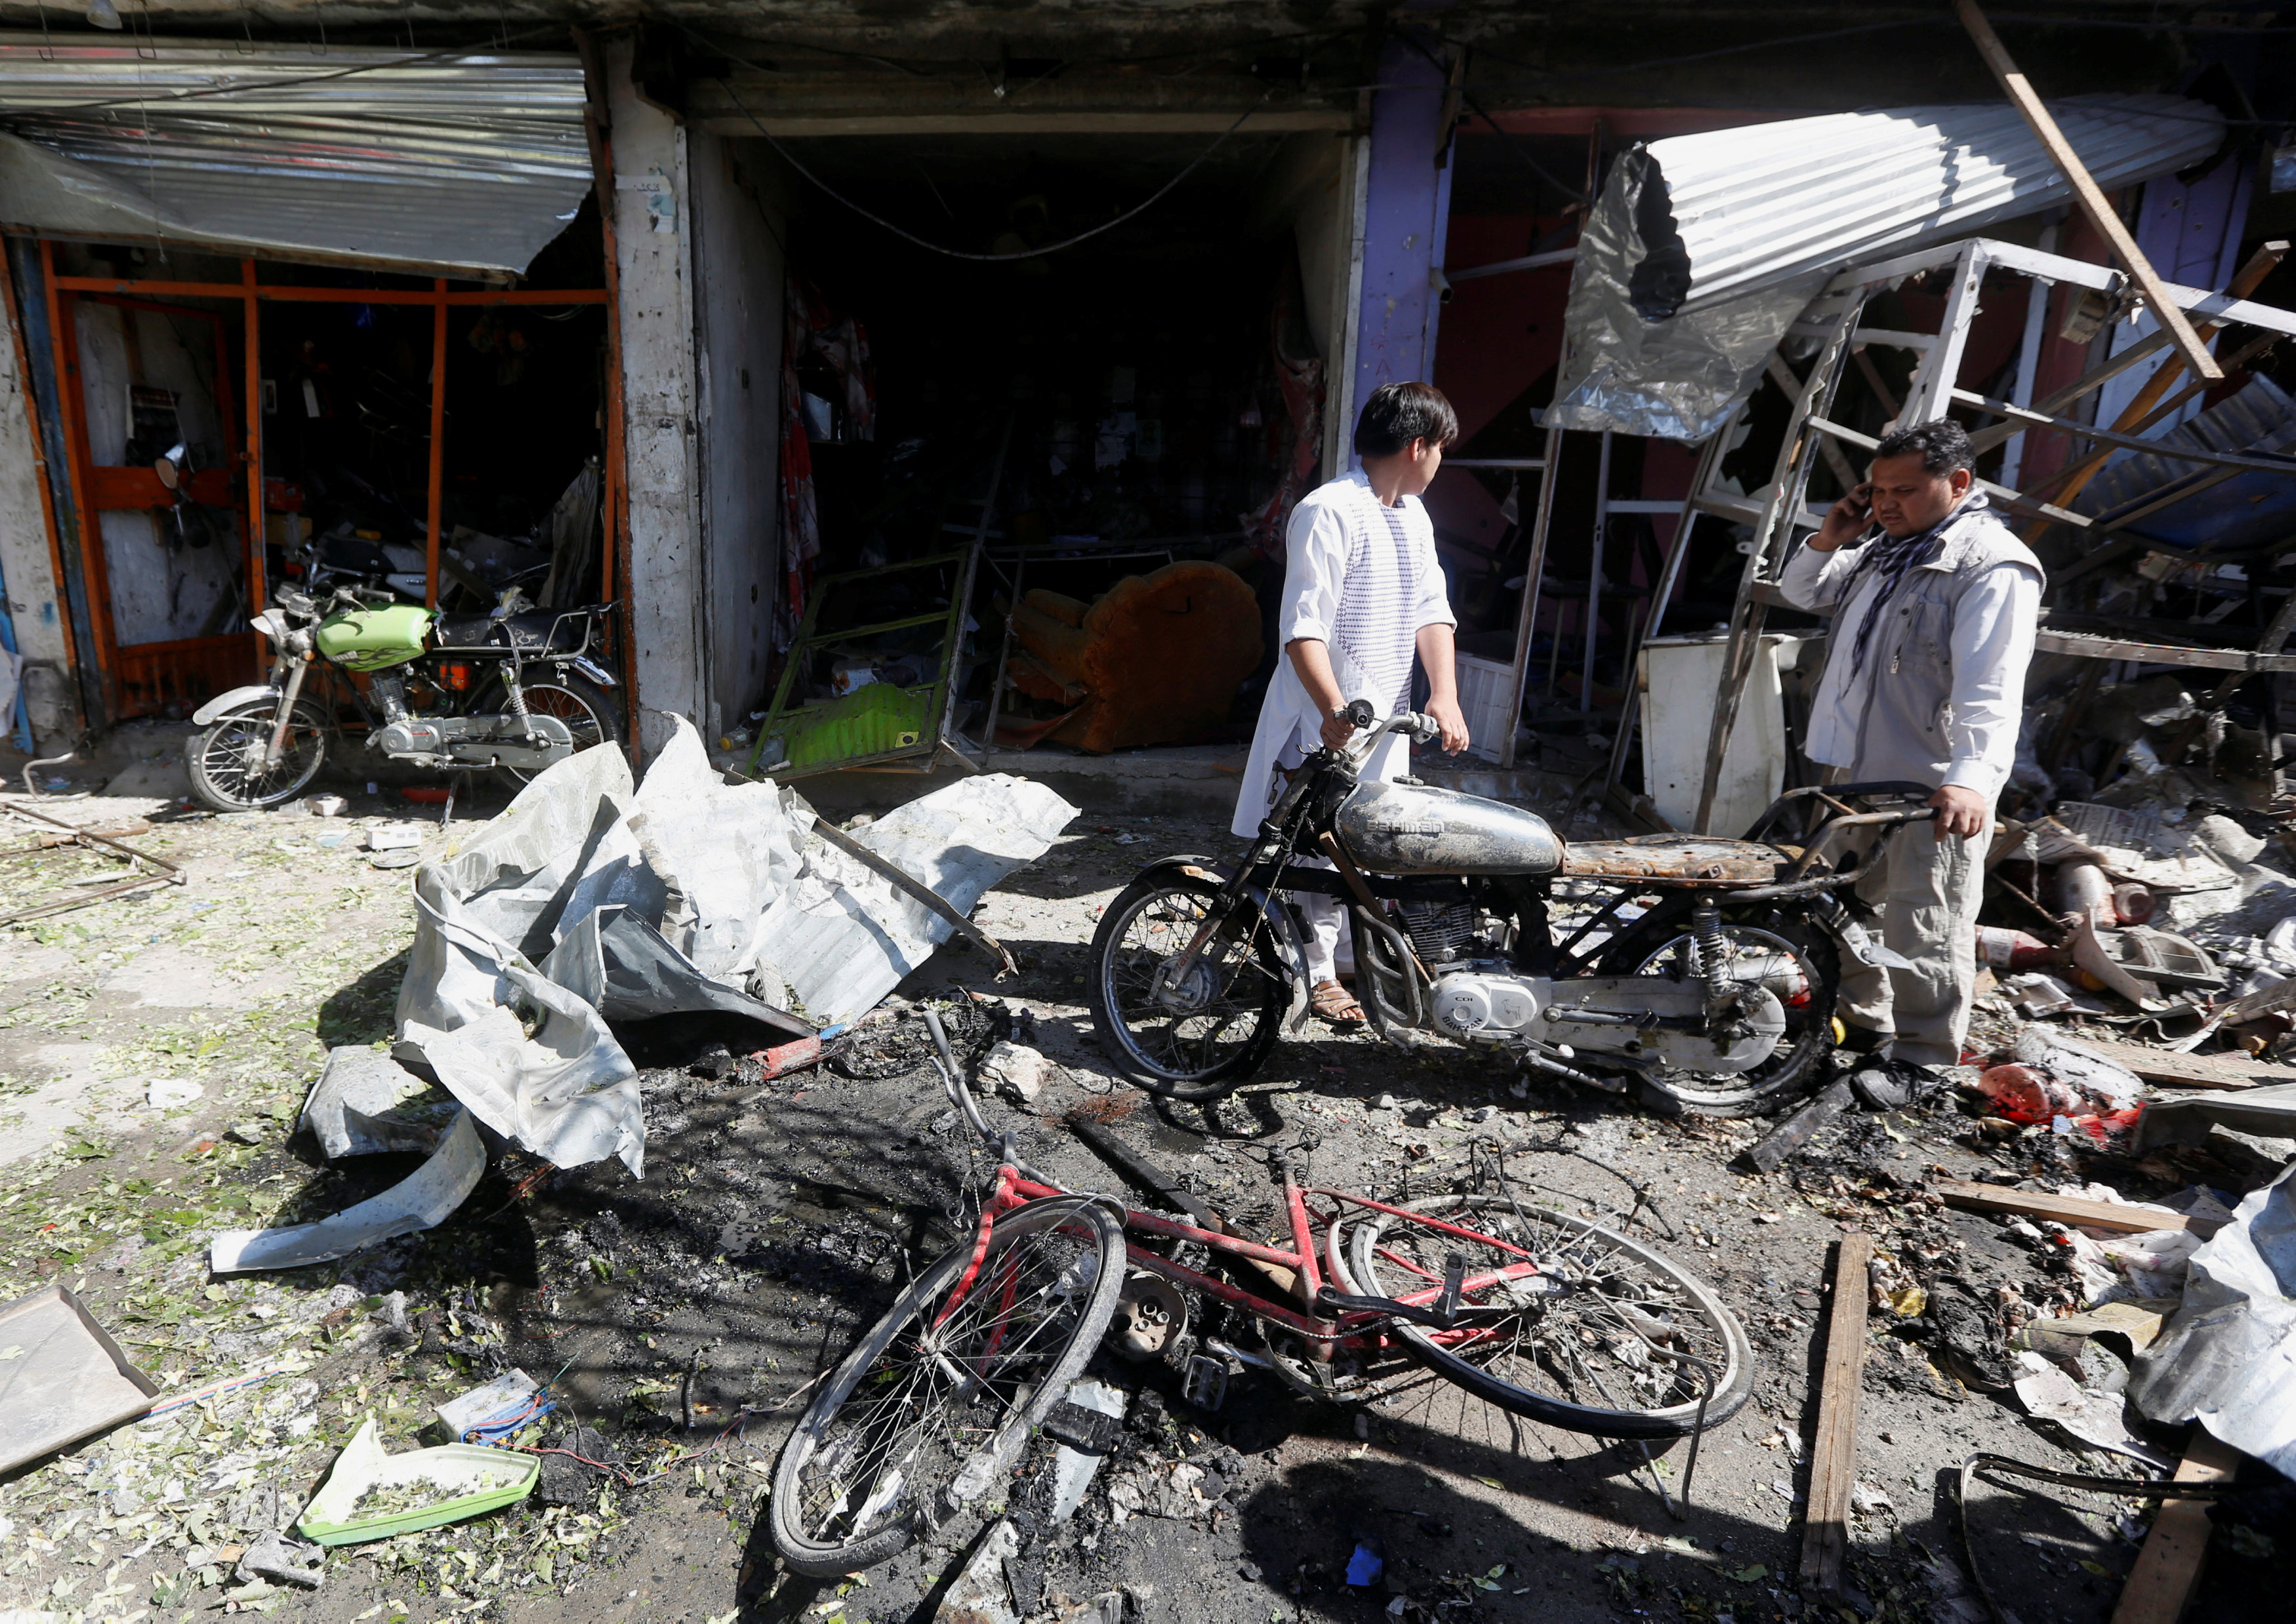 In pictures: Suicide car bombing in Kabul, Afghanistan